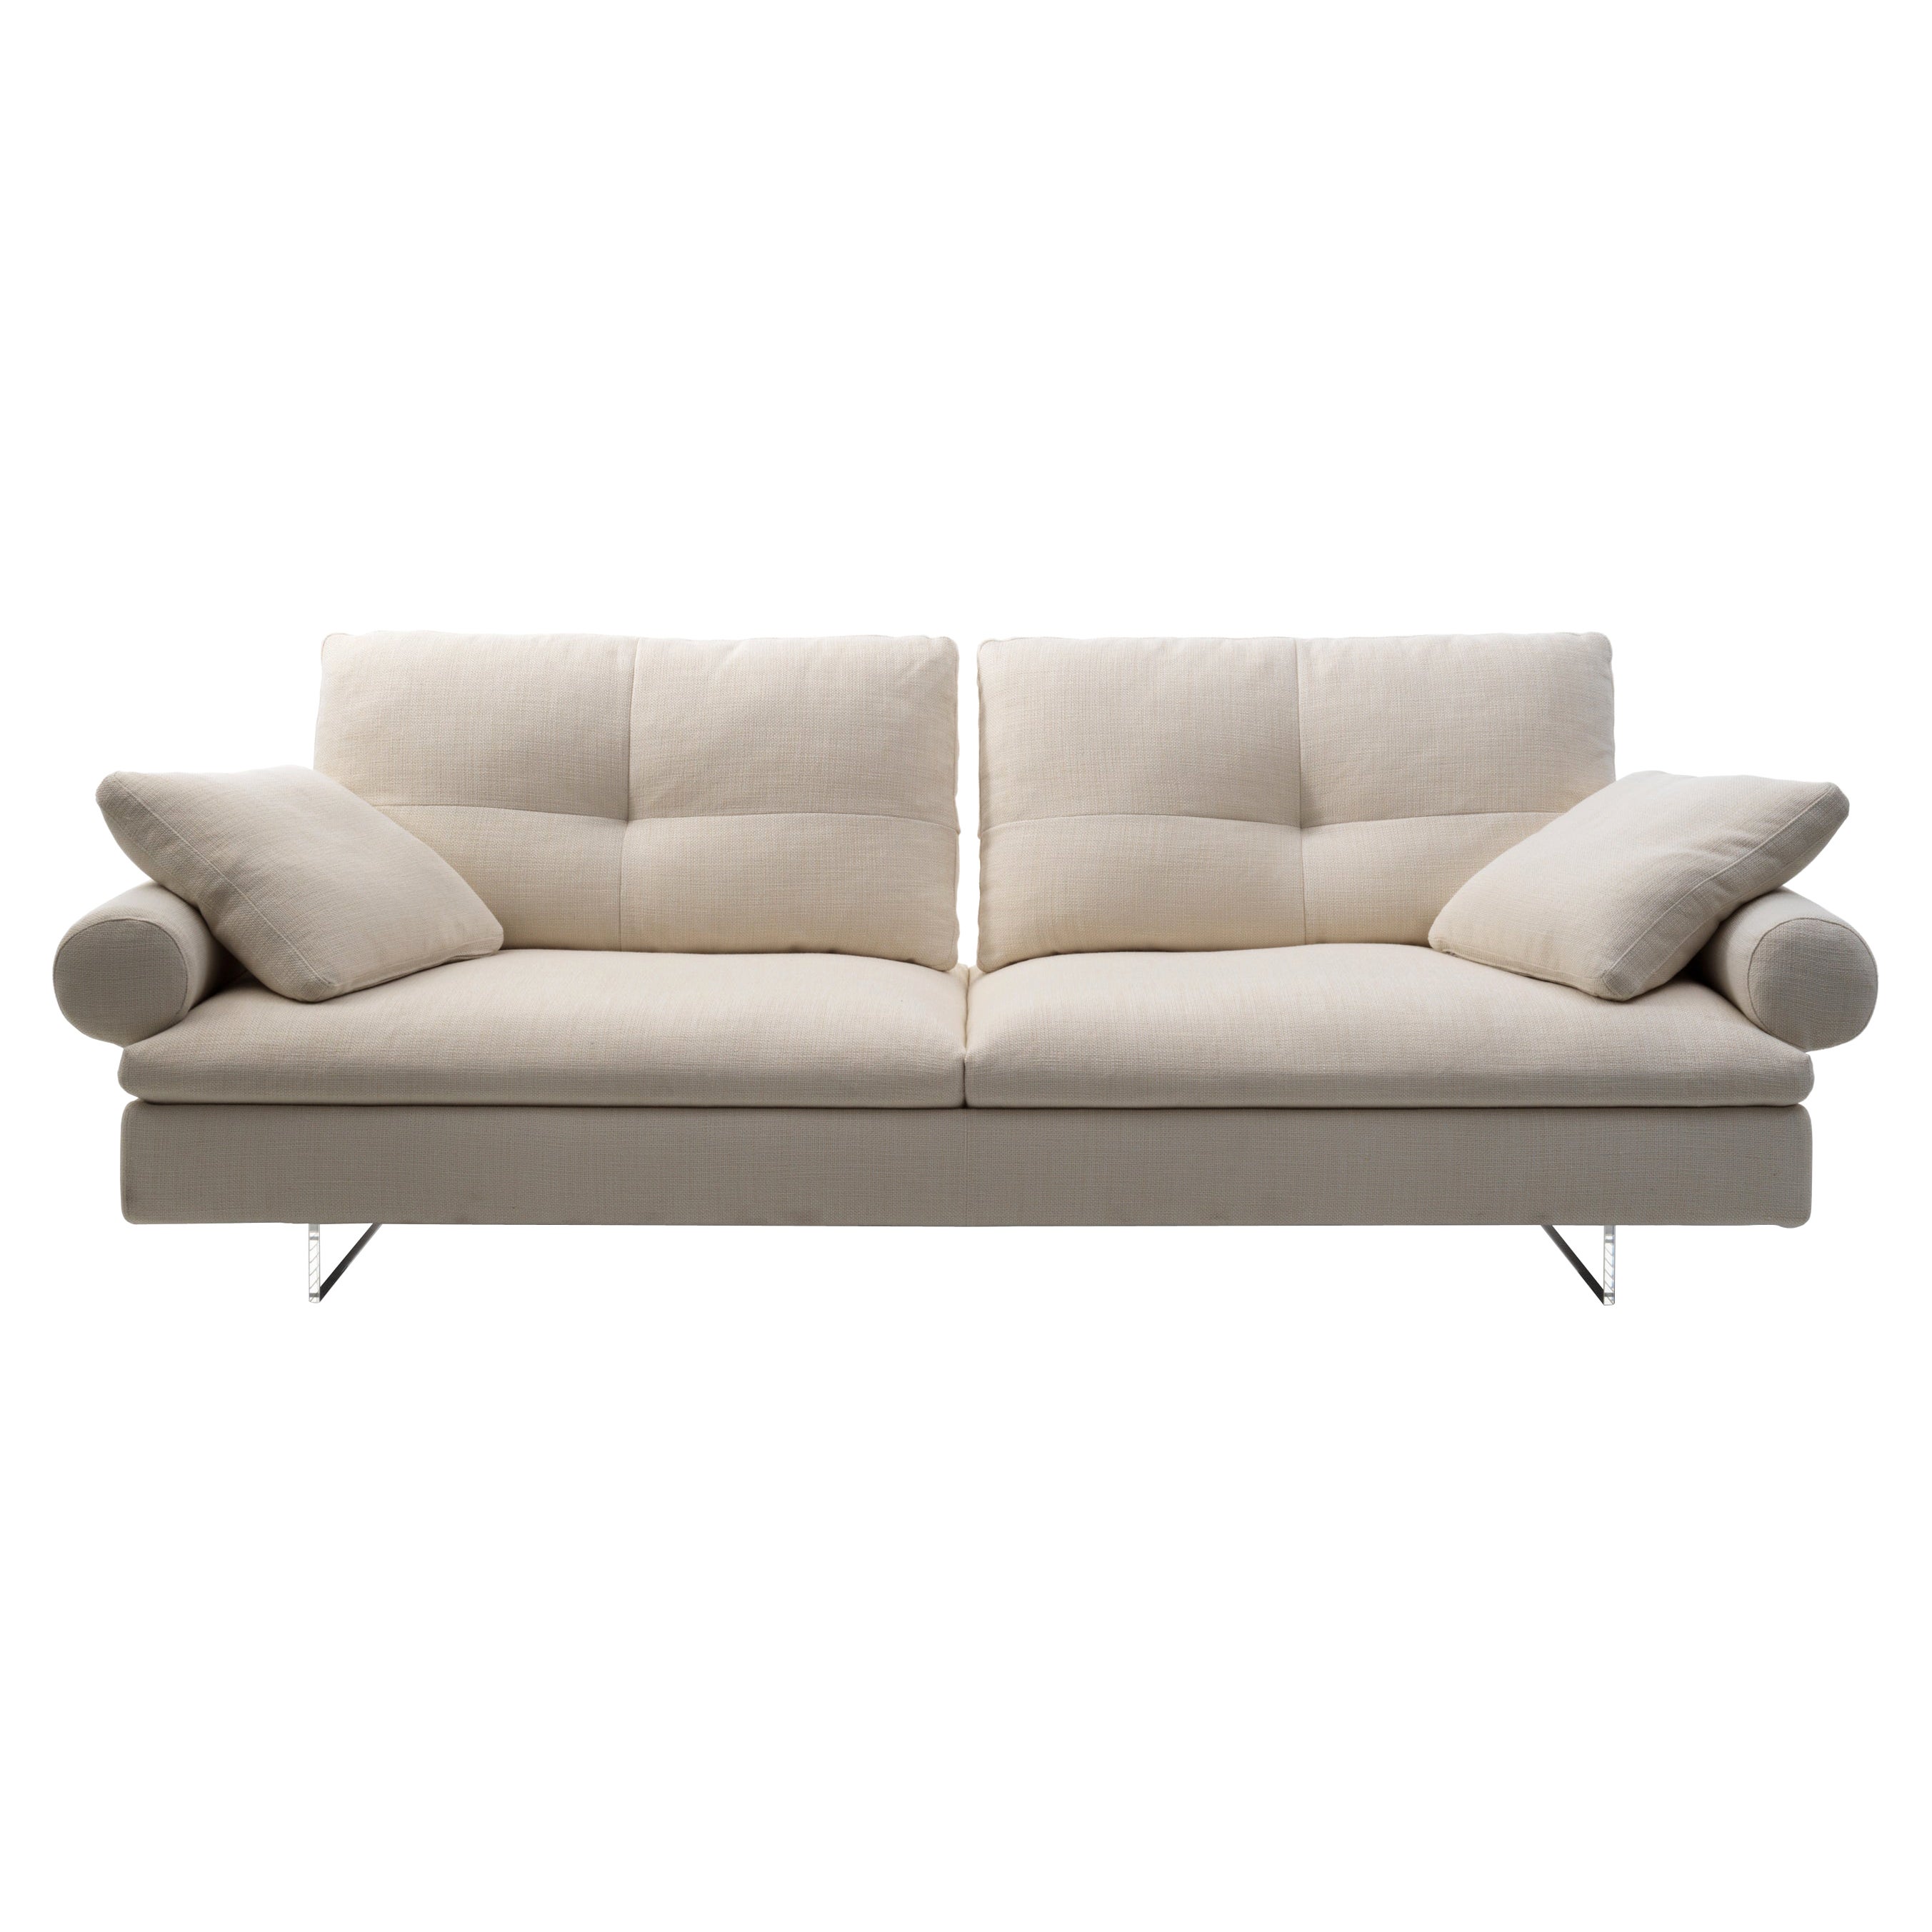 Limes New 88 Large Sofa in Beige Upholstery with Roll Armrest by Sergio Bicego For Sale